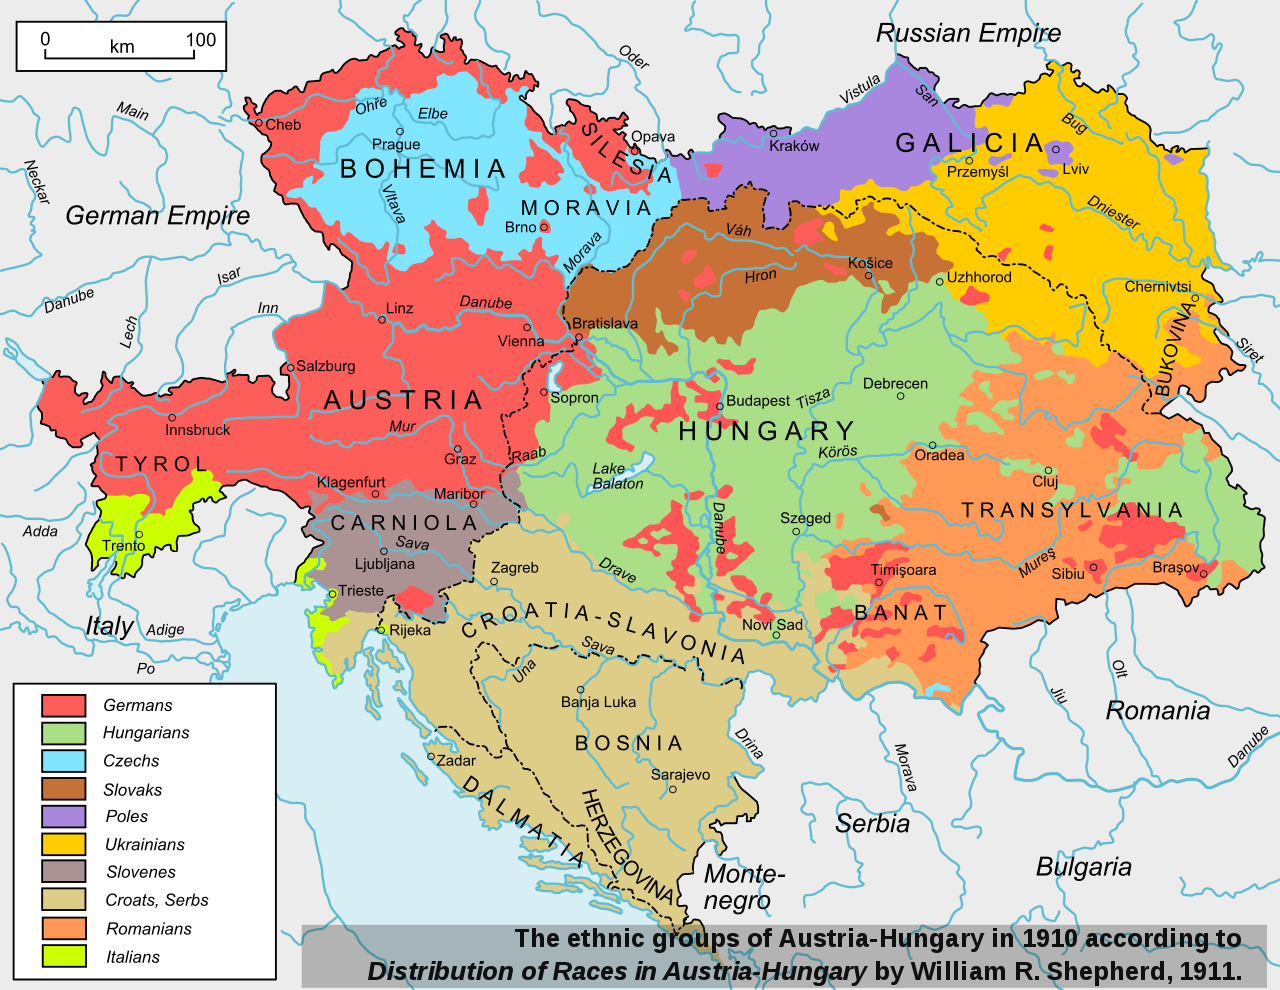 How many Germans and Hungarians lived in the Austro-Hungarian Empire before the First World War?